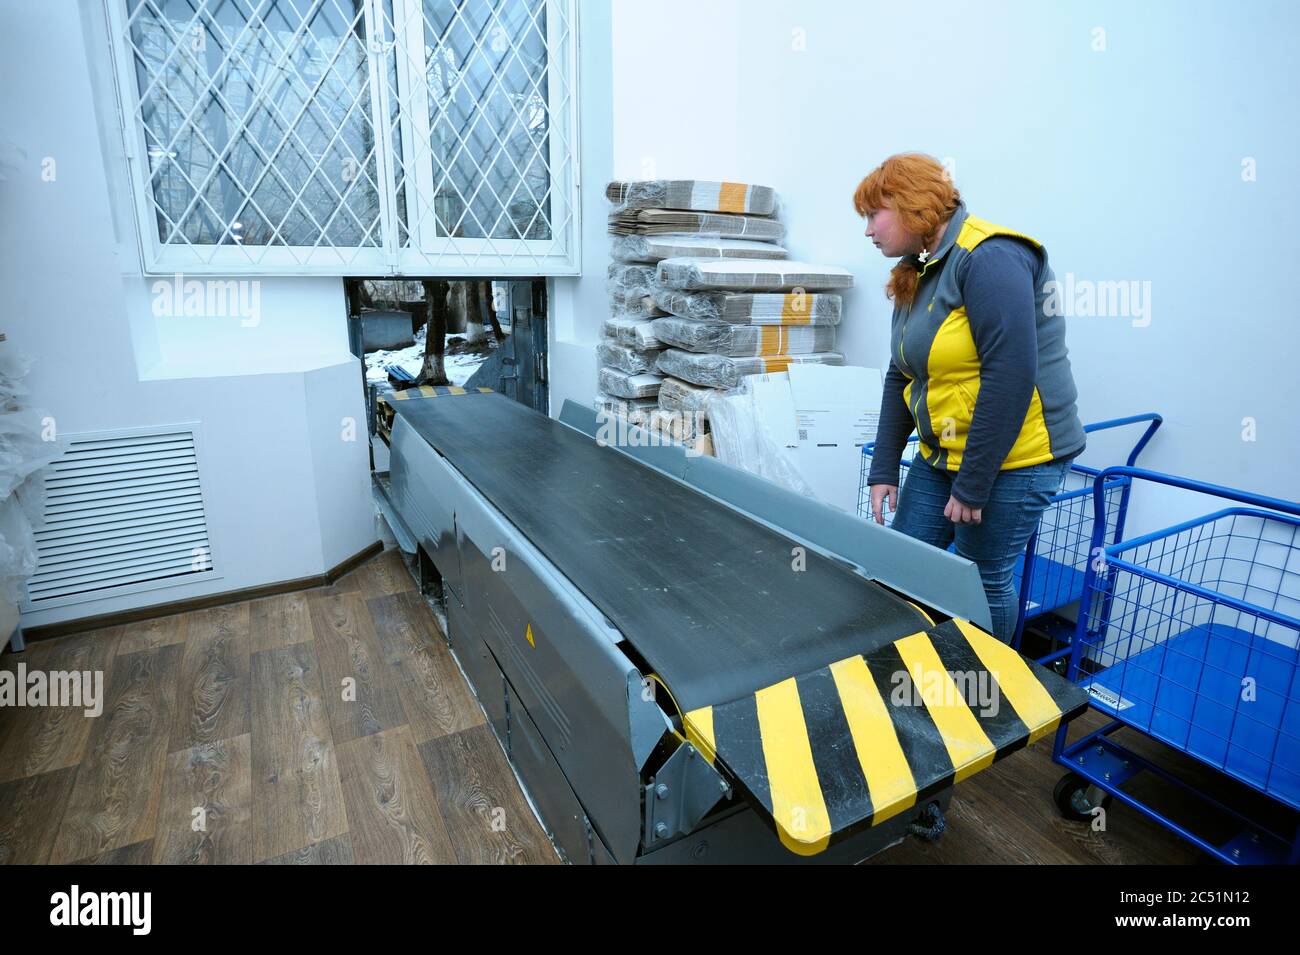 At the receipt and delivery room of post office: postal worker standing by a belt conveyor Stock Photo